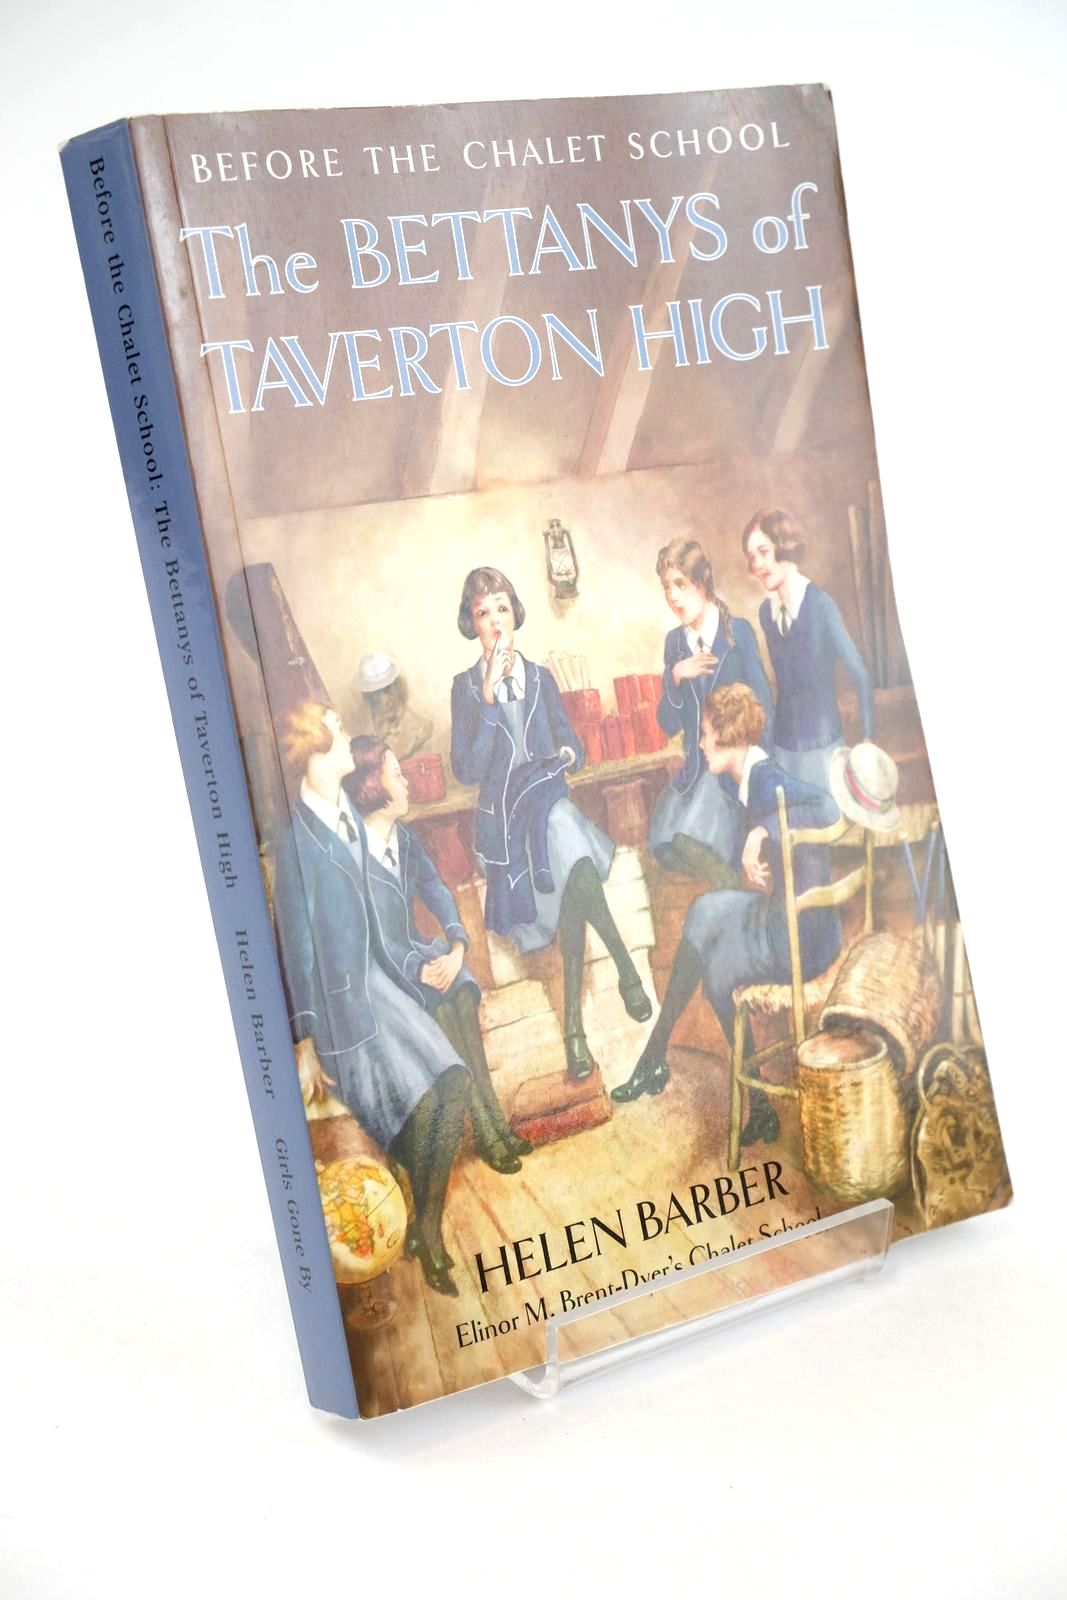 Photo of THE BETTANYS OF TAVERTON HIGH written by Barber, Helen published by Girls Gone By (STOCK CODE: 1323969)  for sale by Stella & Rose's Books